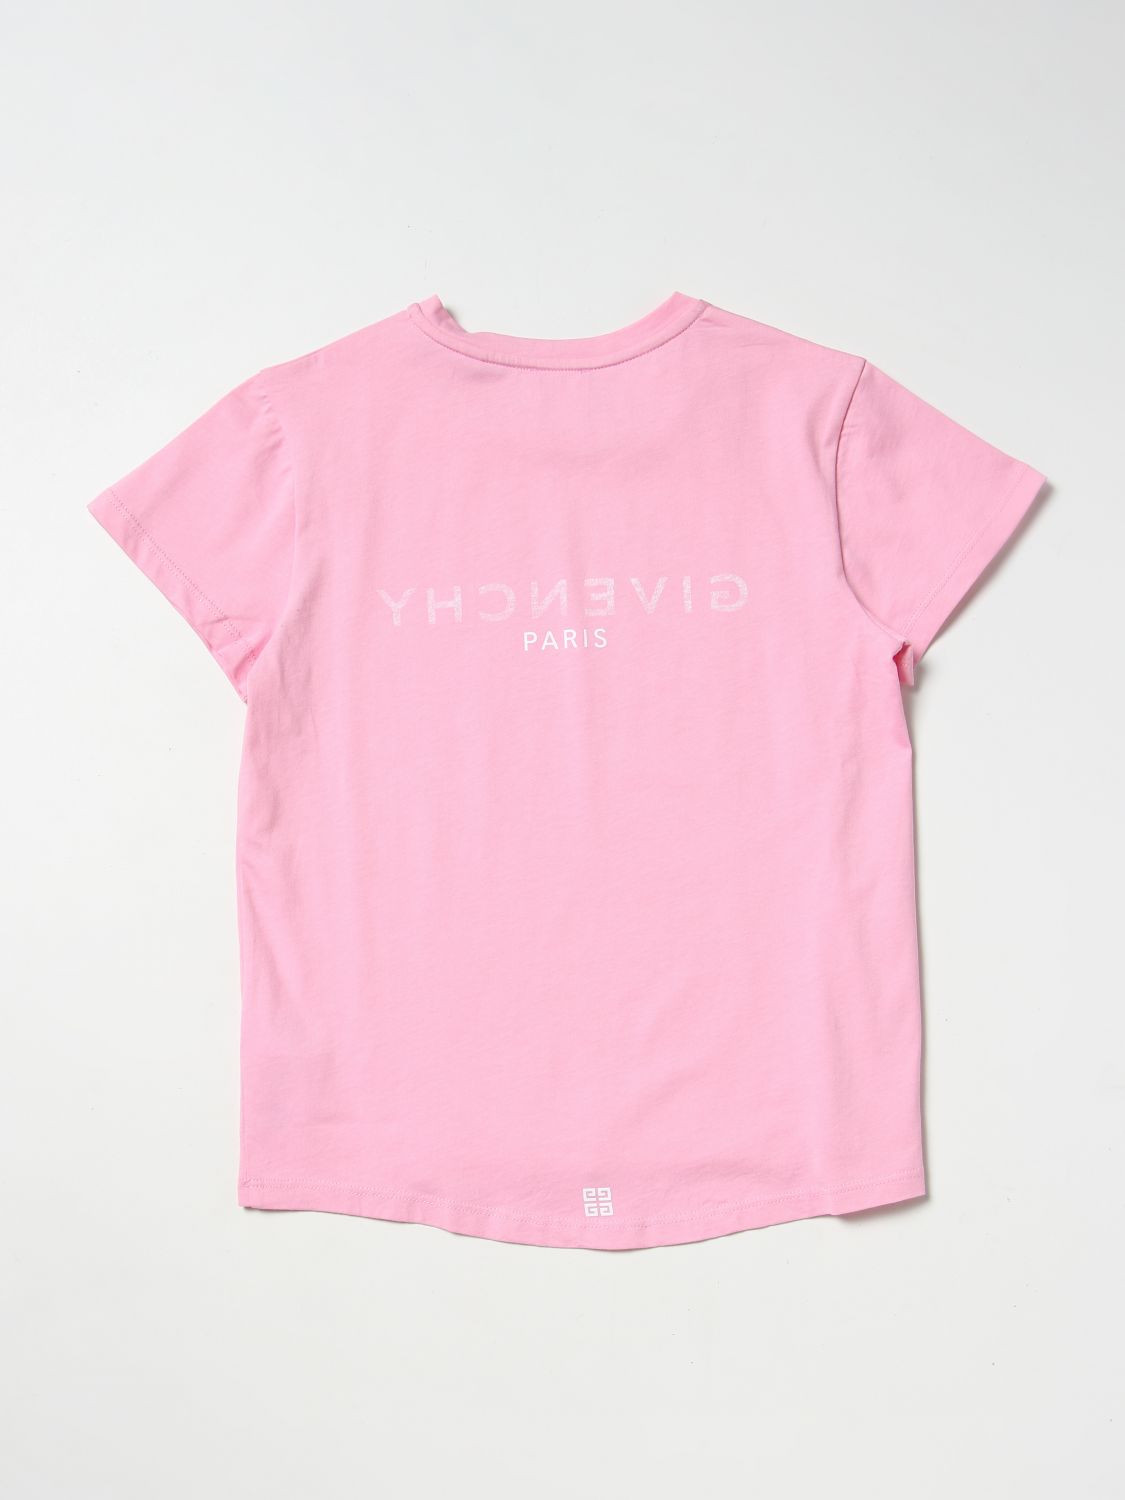 GIVENCHY: t-shirt for girls - Pink | Givenchy t-shirt H15296 online on  